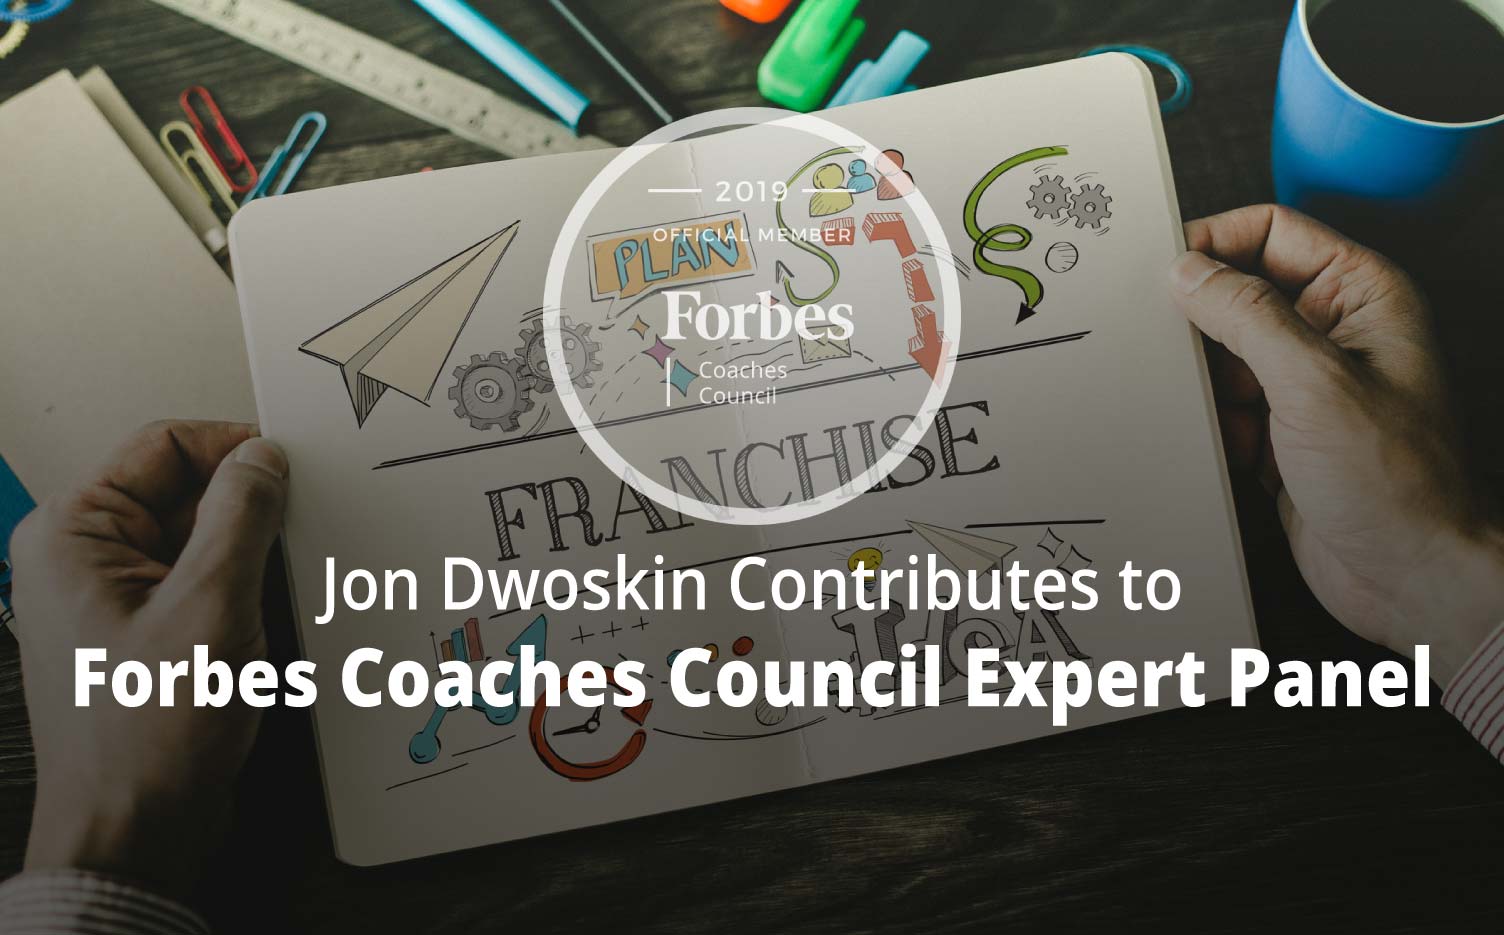 Jon Contributes to Forbes Coaches Council Expert Panel: Should You Franchise Your Business? 13 Questions To Ask Yourself